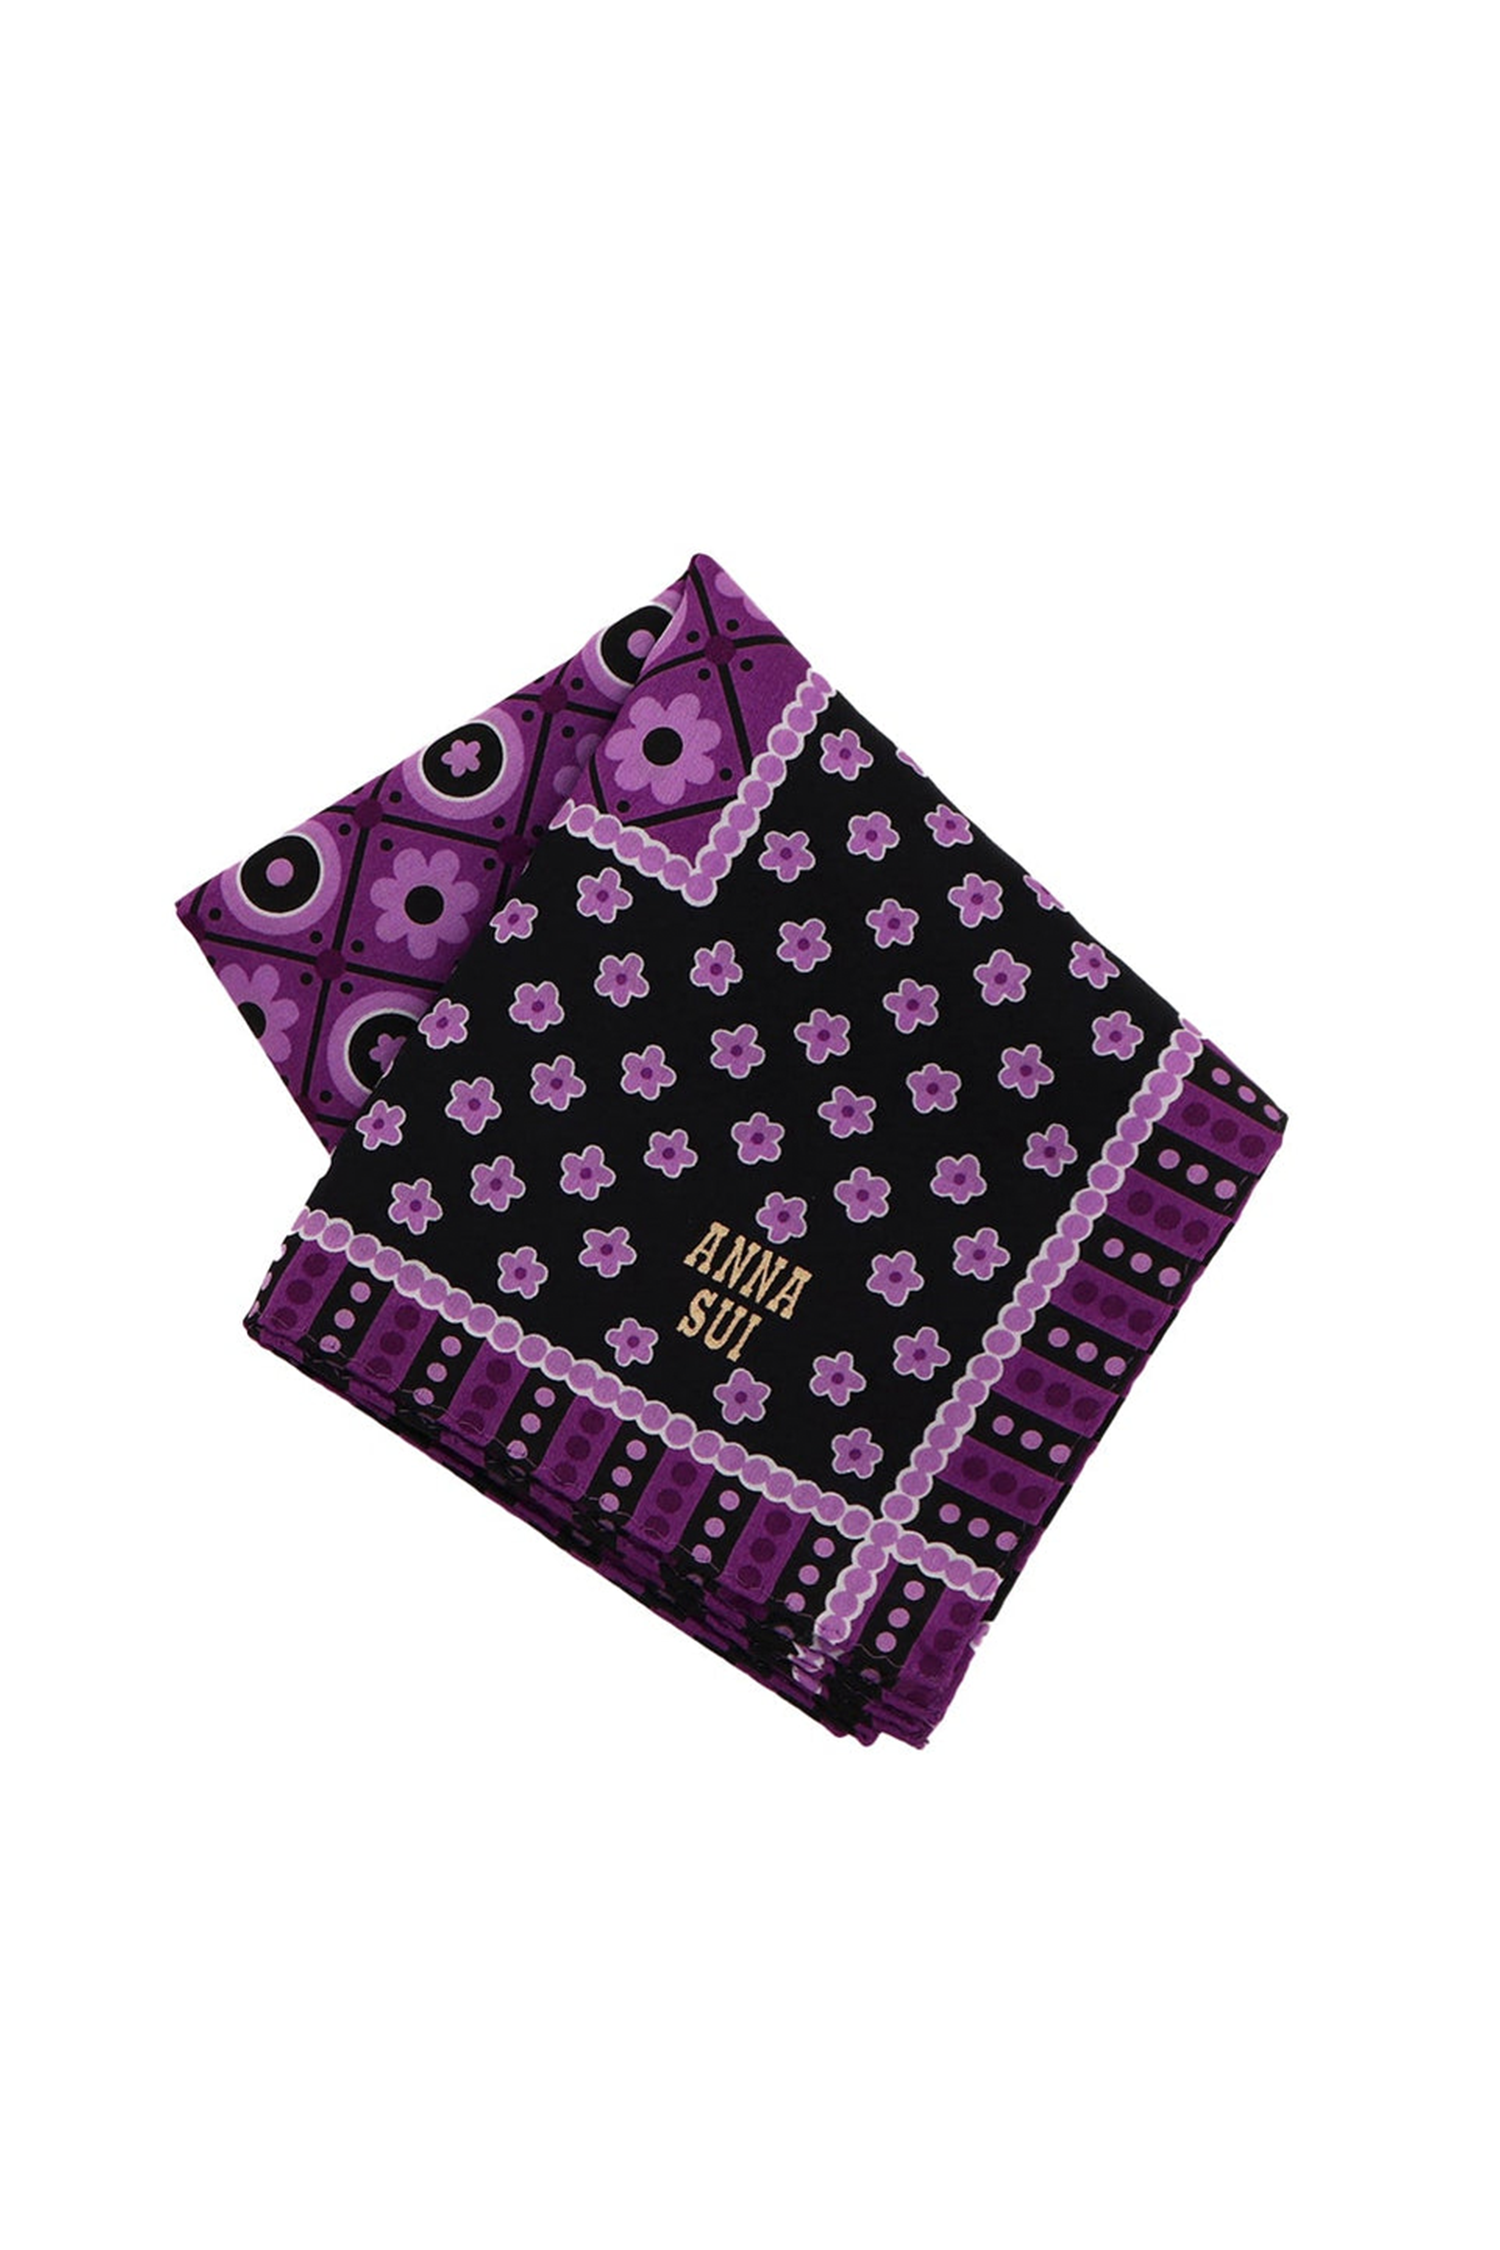 Handkerchief, purple square with purple flower then black with lines of pink flowers, Anna’s label